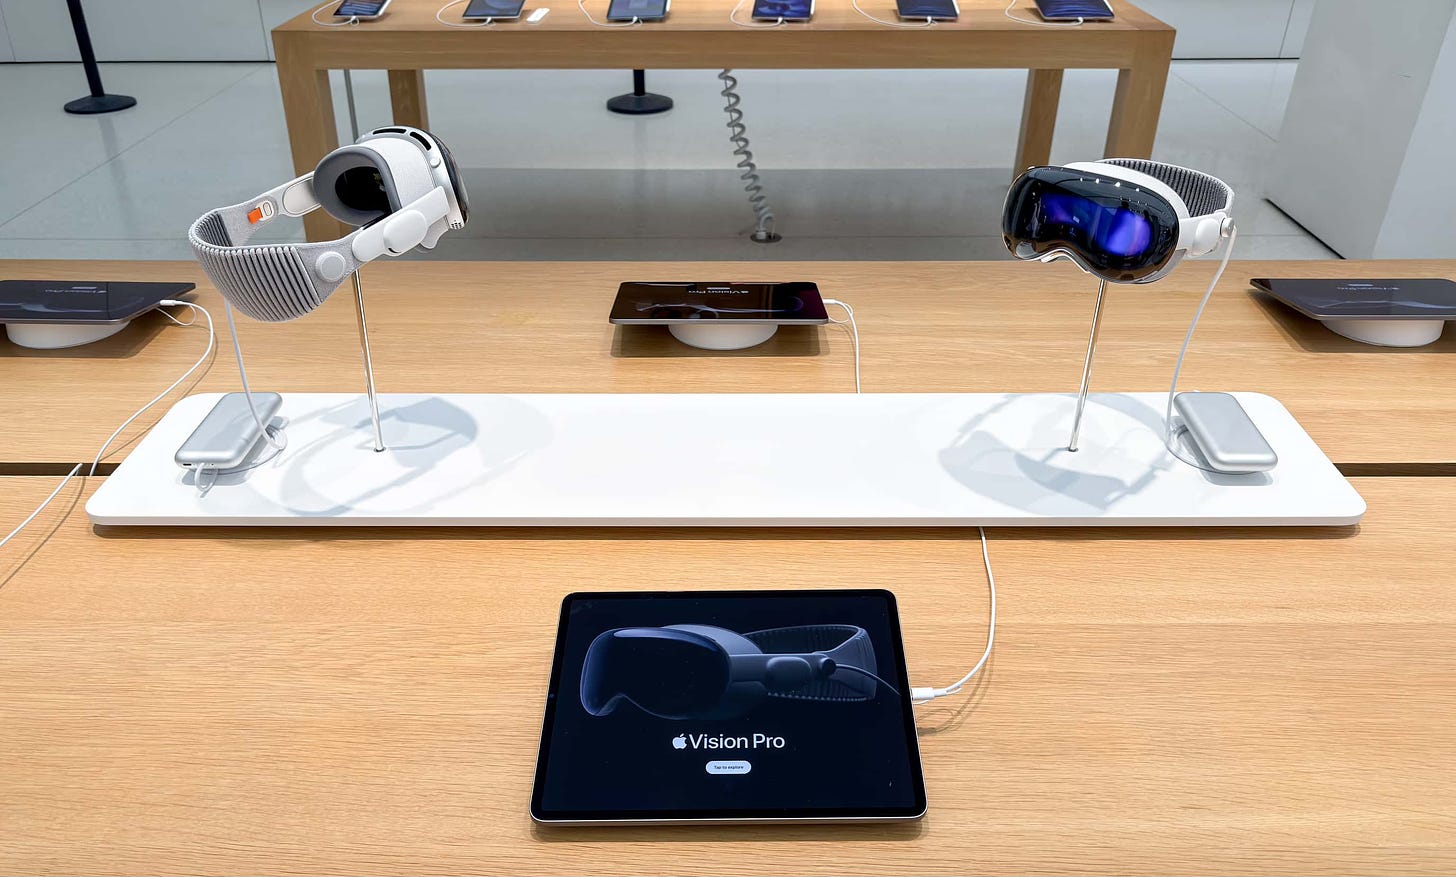 An Apple Vision Pro riser on a store table.